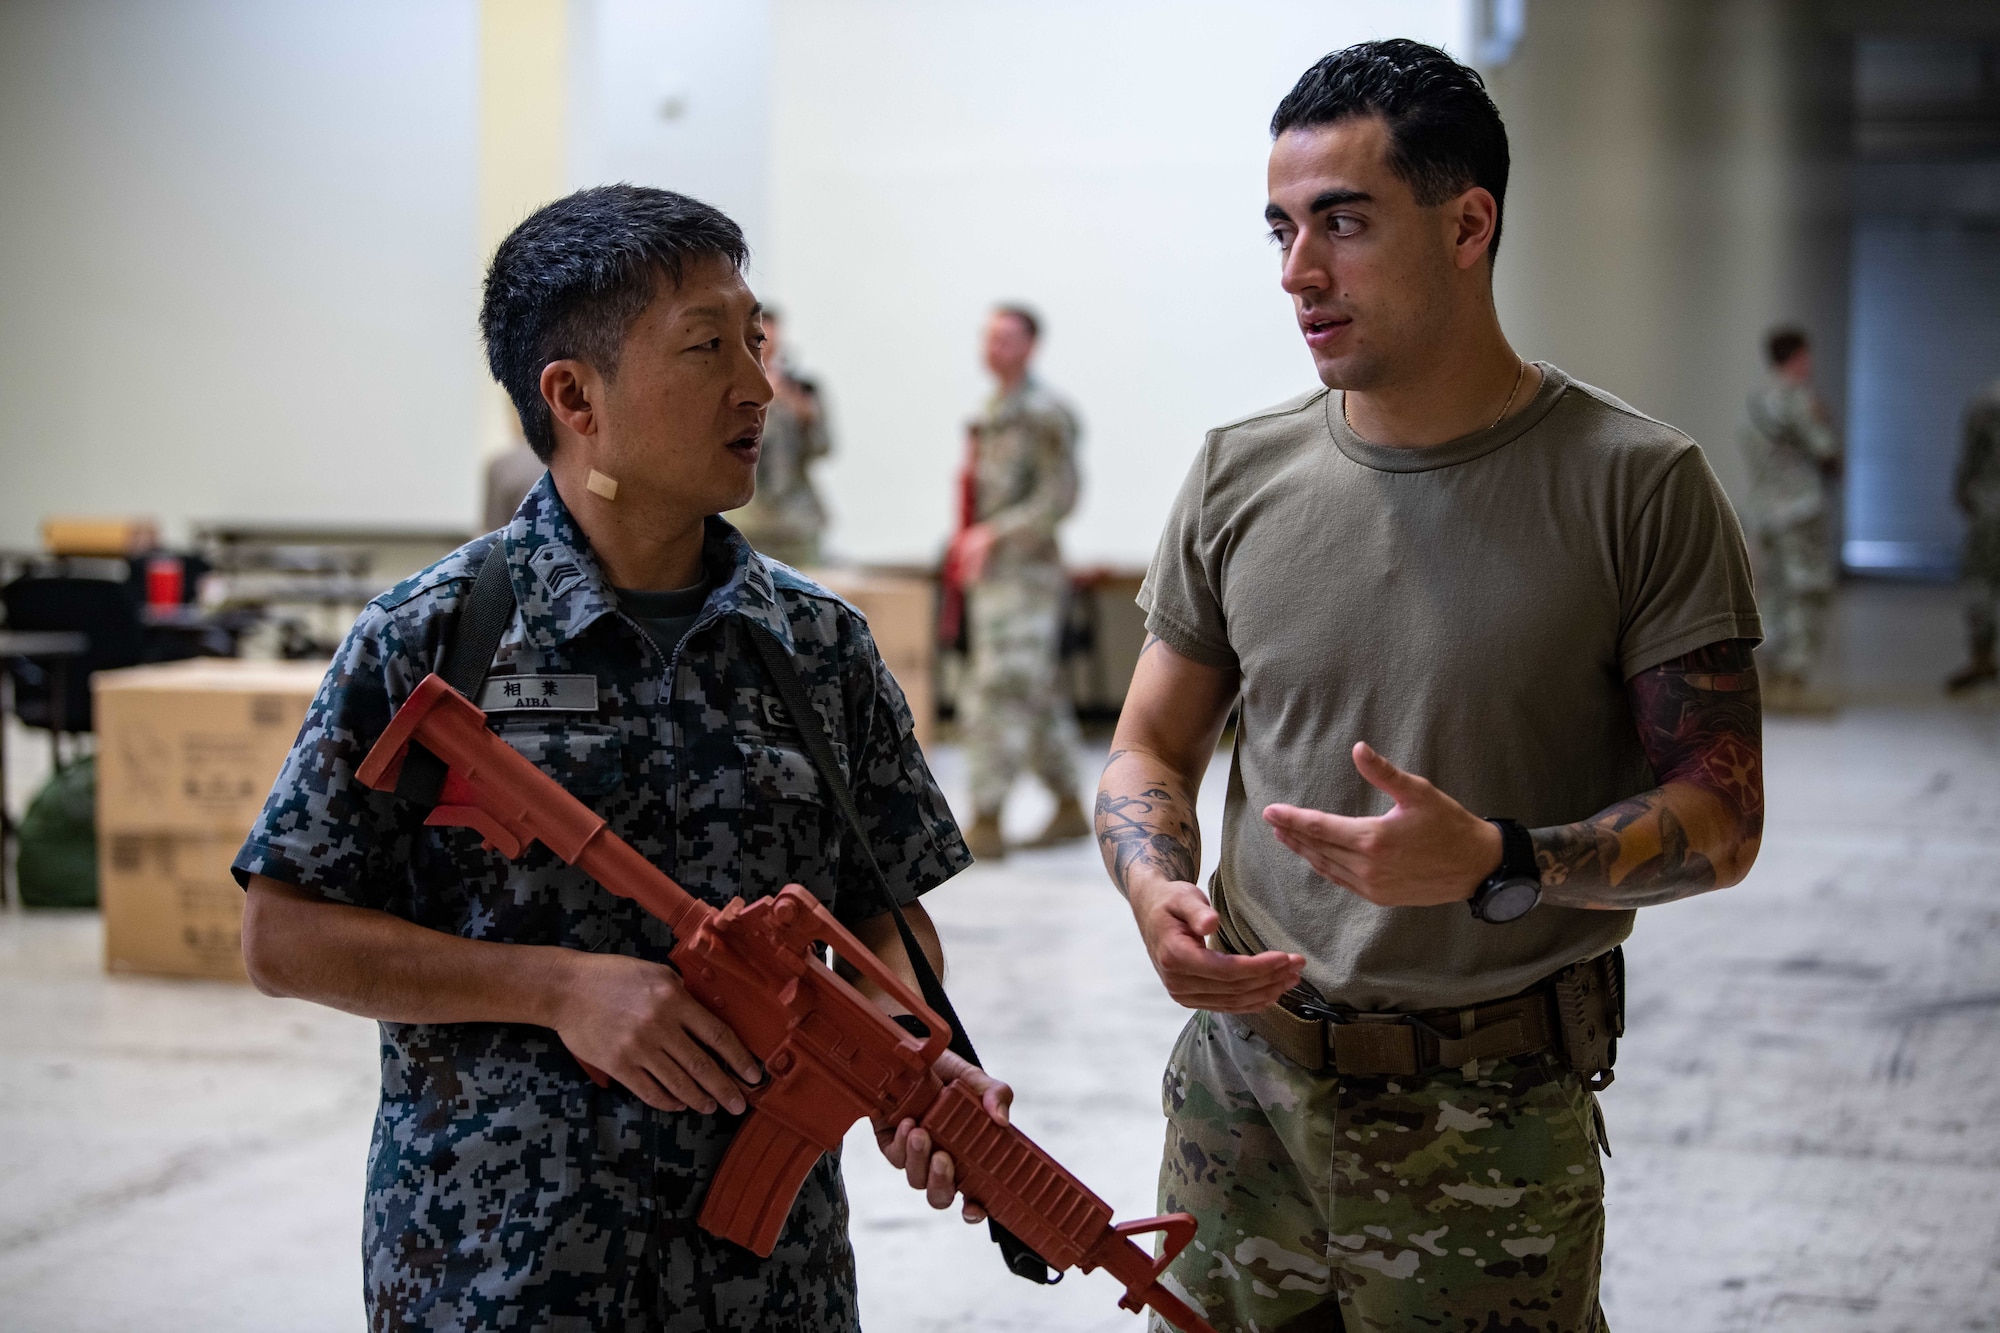 An Airman and a JASDF service member practice handling a weapon.